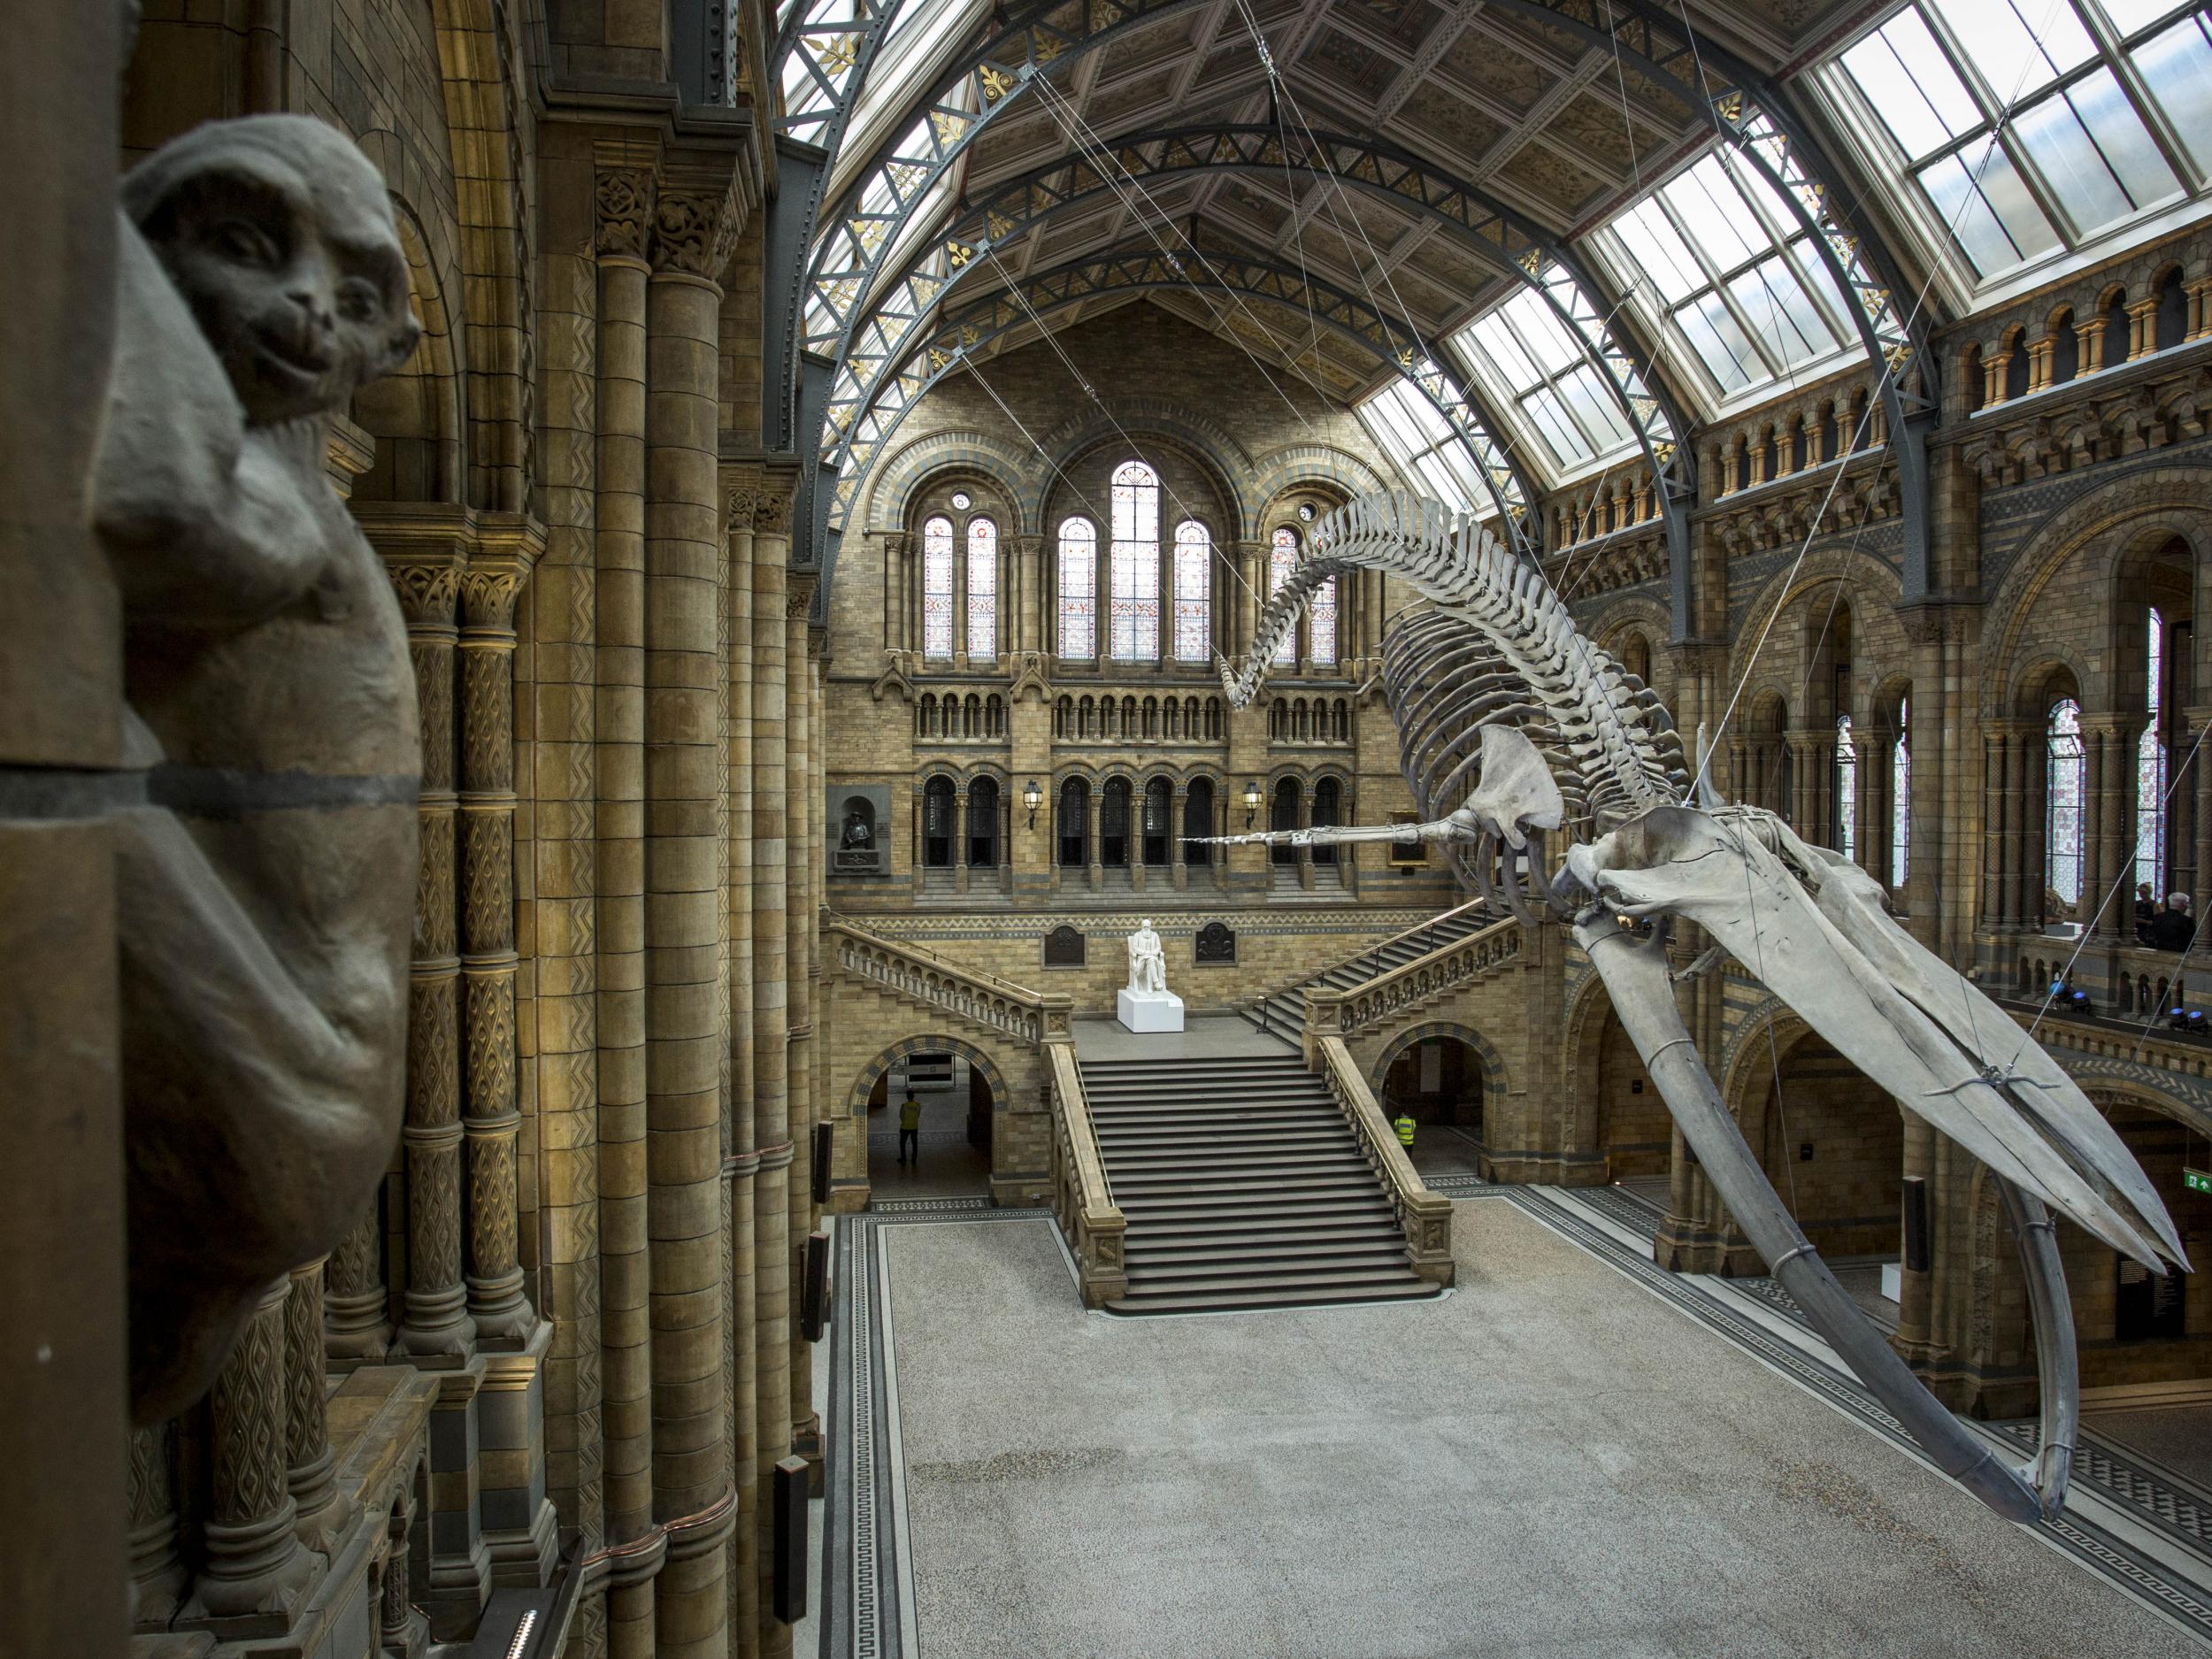 A blue whale skeleton forms the main exhibit at the Natural History Museum in London. The 126-year-old skeleton, named 'Hope', replaces 'Dippy' the Diplodocus dinosaur as the museum's main exhibit